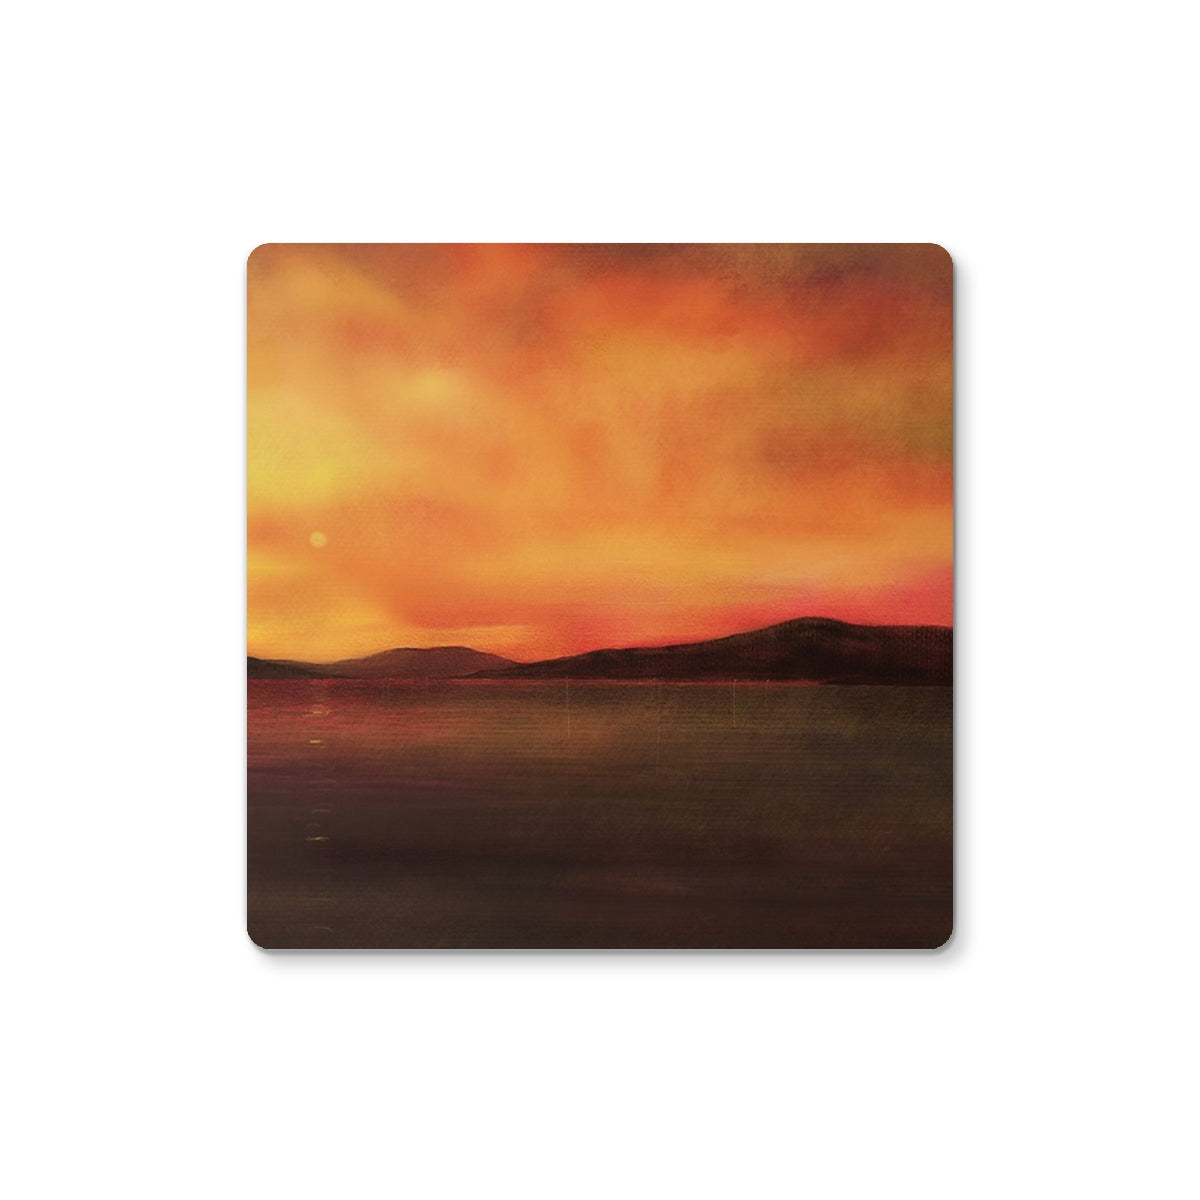 Harris Sunset Art Gifts Coaster-Coasters-Hebridean Islands Art Gallery-2 Coasters-Paintings, Prints, Homeware, Art Gifts From Scotland By Scottish Artist Kevin Hunter